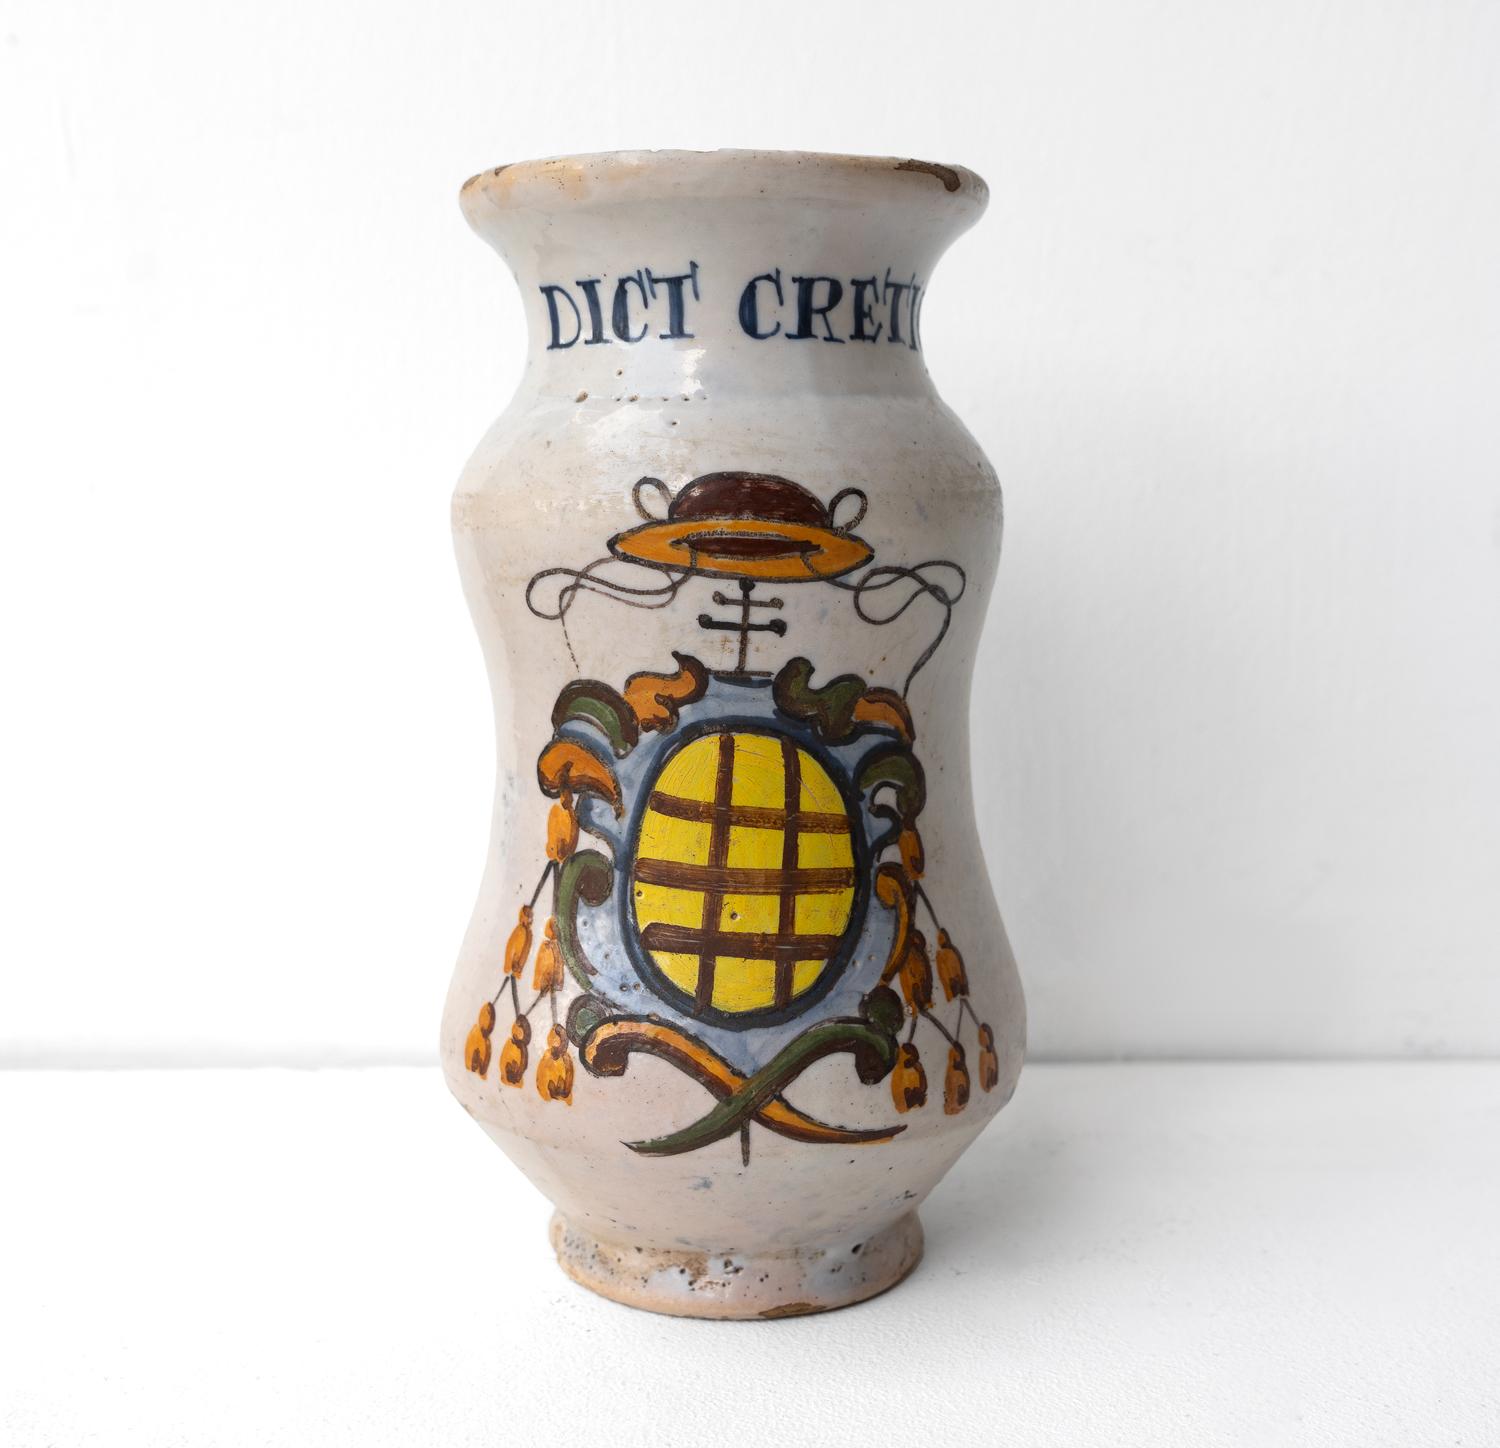 ANTIQUE GLAZED CERAMIC DRUG STORAGE JAR 
An original 18th-century glazed ceramic drug jar or ‘albarello’.

Of waisted form with hand-painted polychrome crest and script reading ‘DICT CRETIC’.

It is in very good vintage condition for its age, there